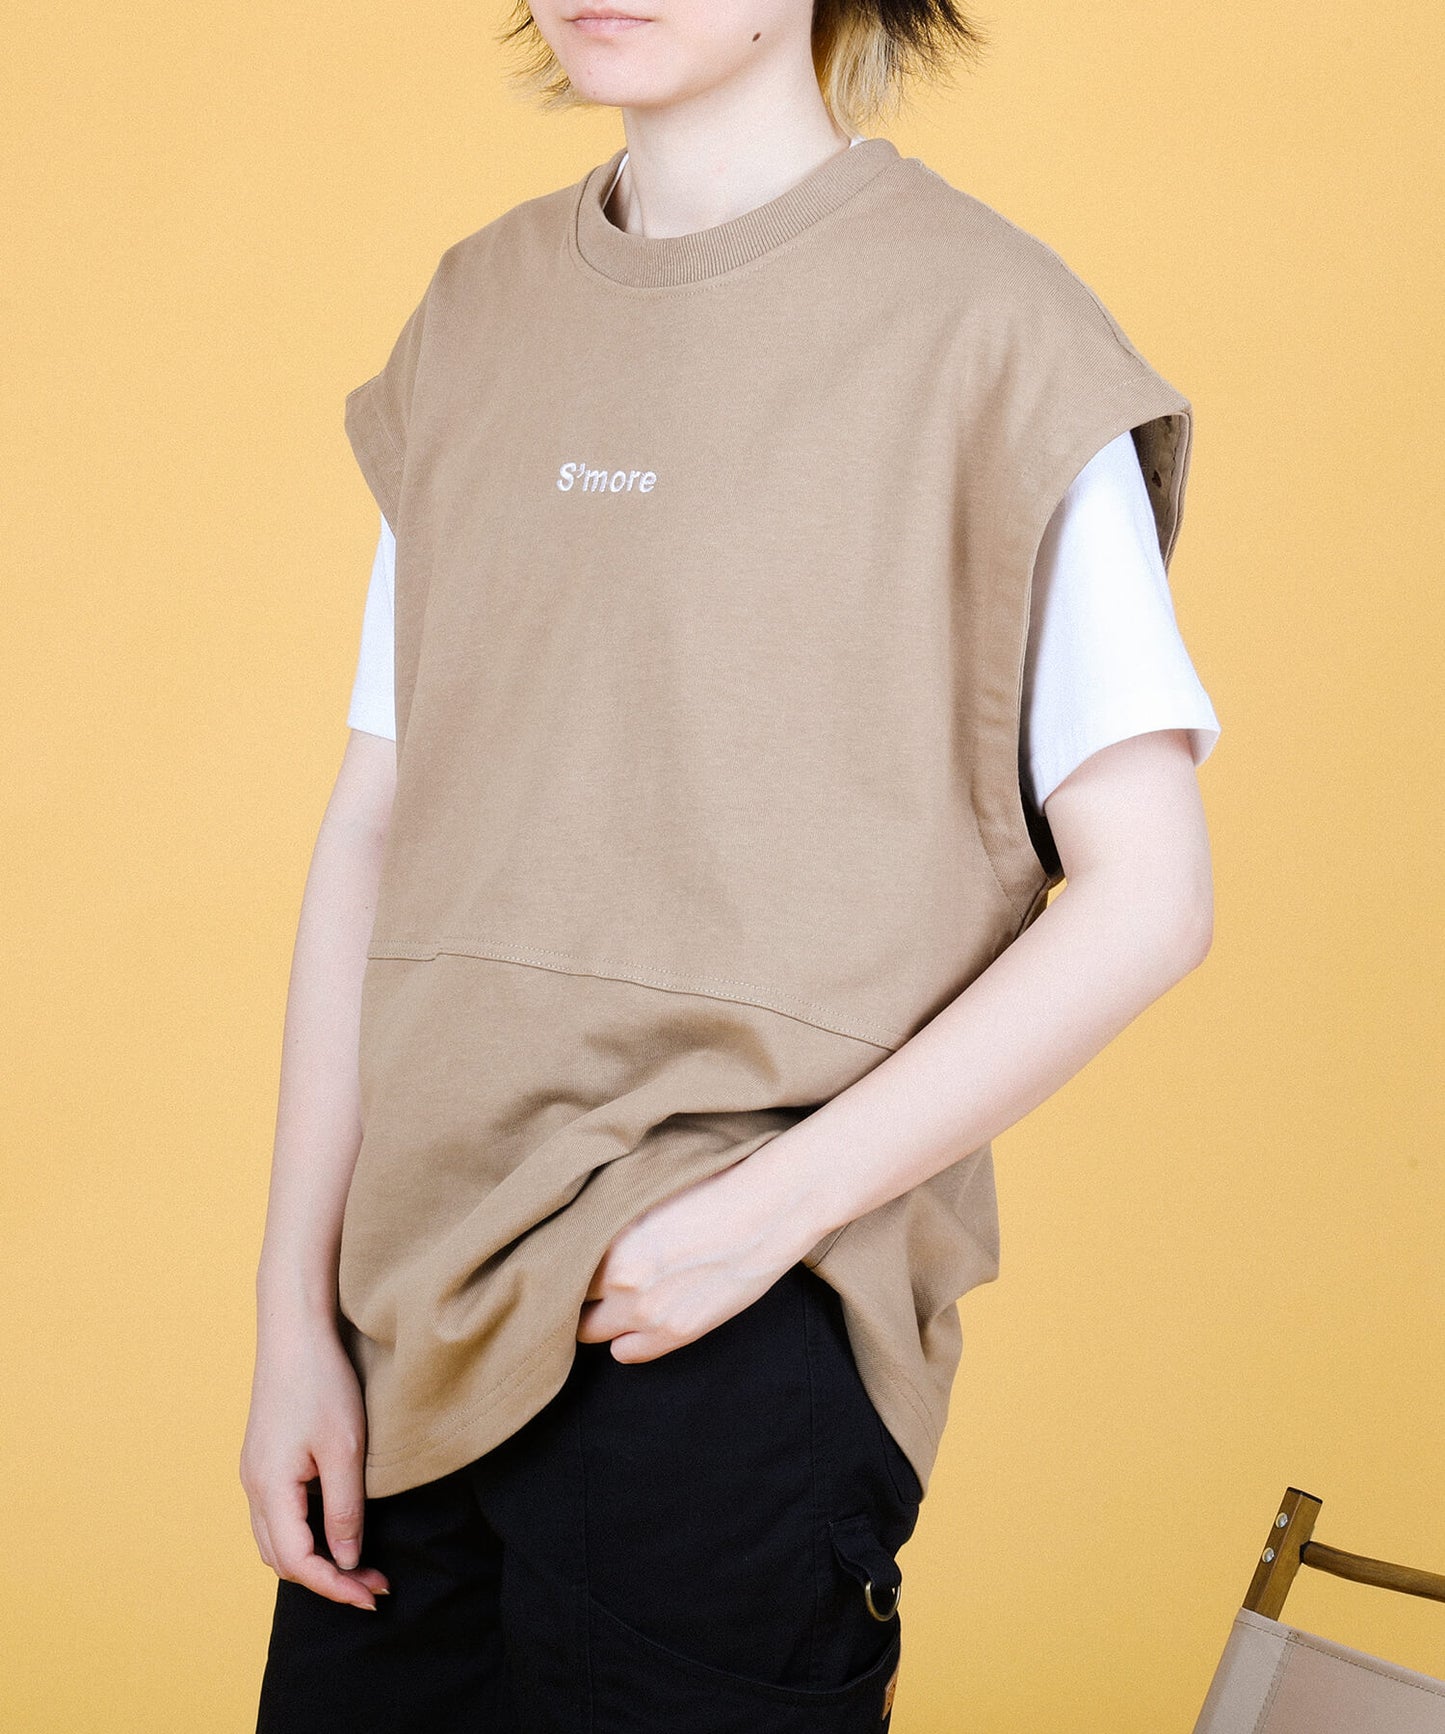 New!! 2WAY REMOVABLE SLEEVE COTTON CREW NECK BIG S/S T-SHIRT